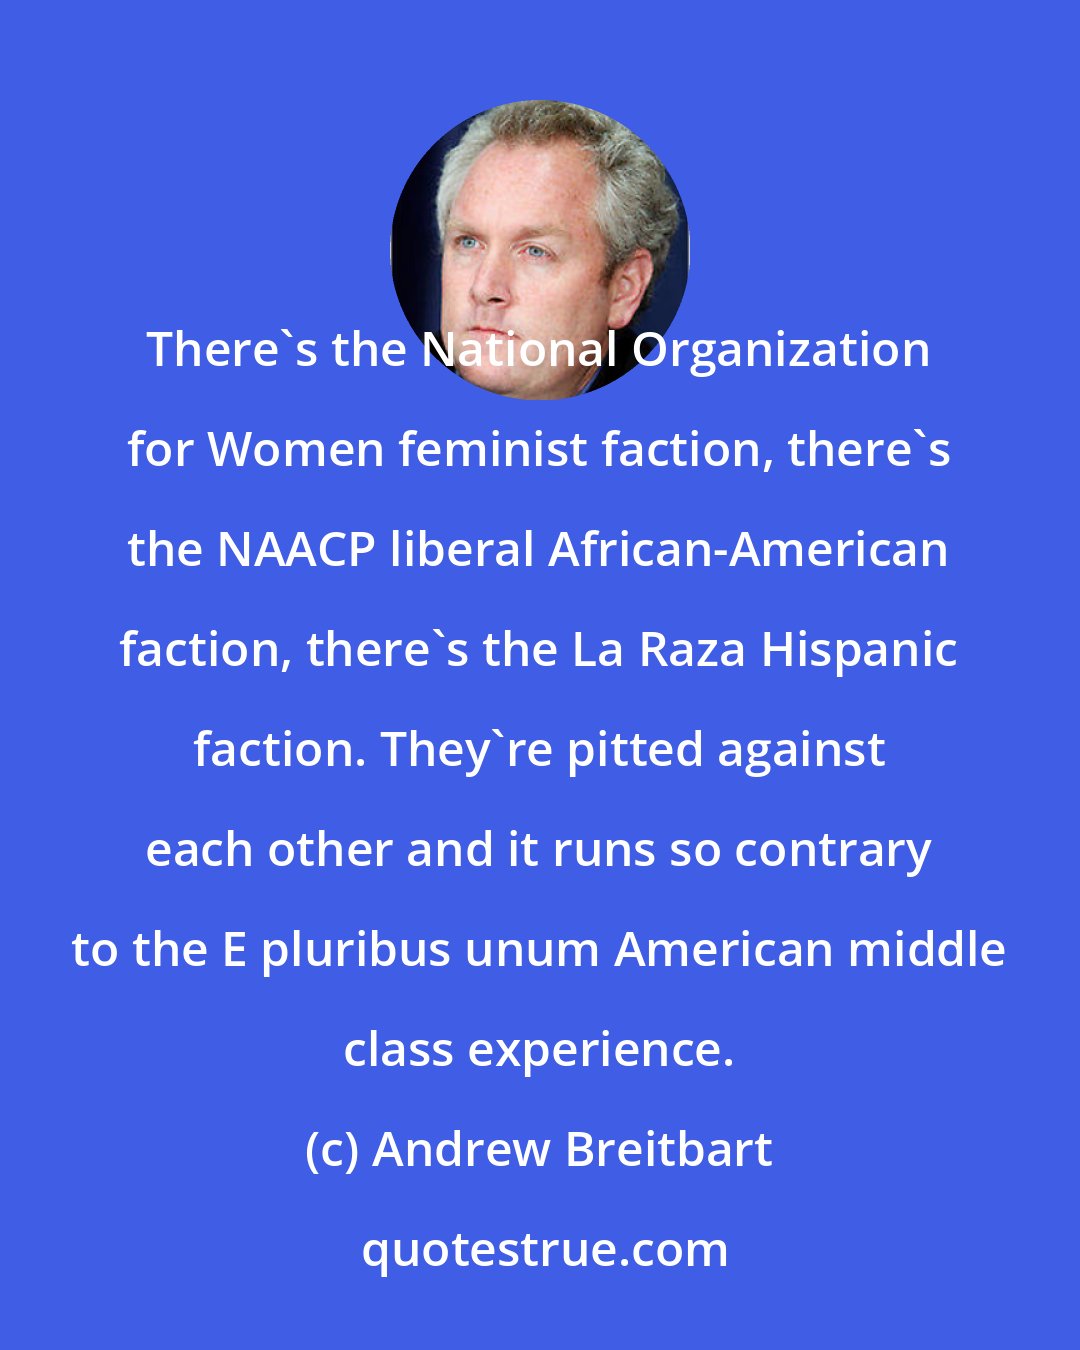 Andrew Breitbart: There's the National Organization for Women feminist faction, there's the NAACP liberal African-American faction, there's the La Raza Hispanic faction. They're pitted against each other and it runs so contrary to the E pluribus unum American middle class experience.